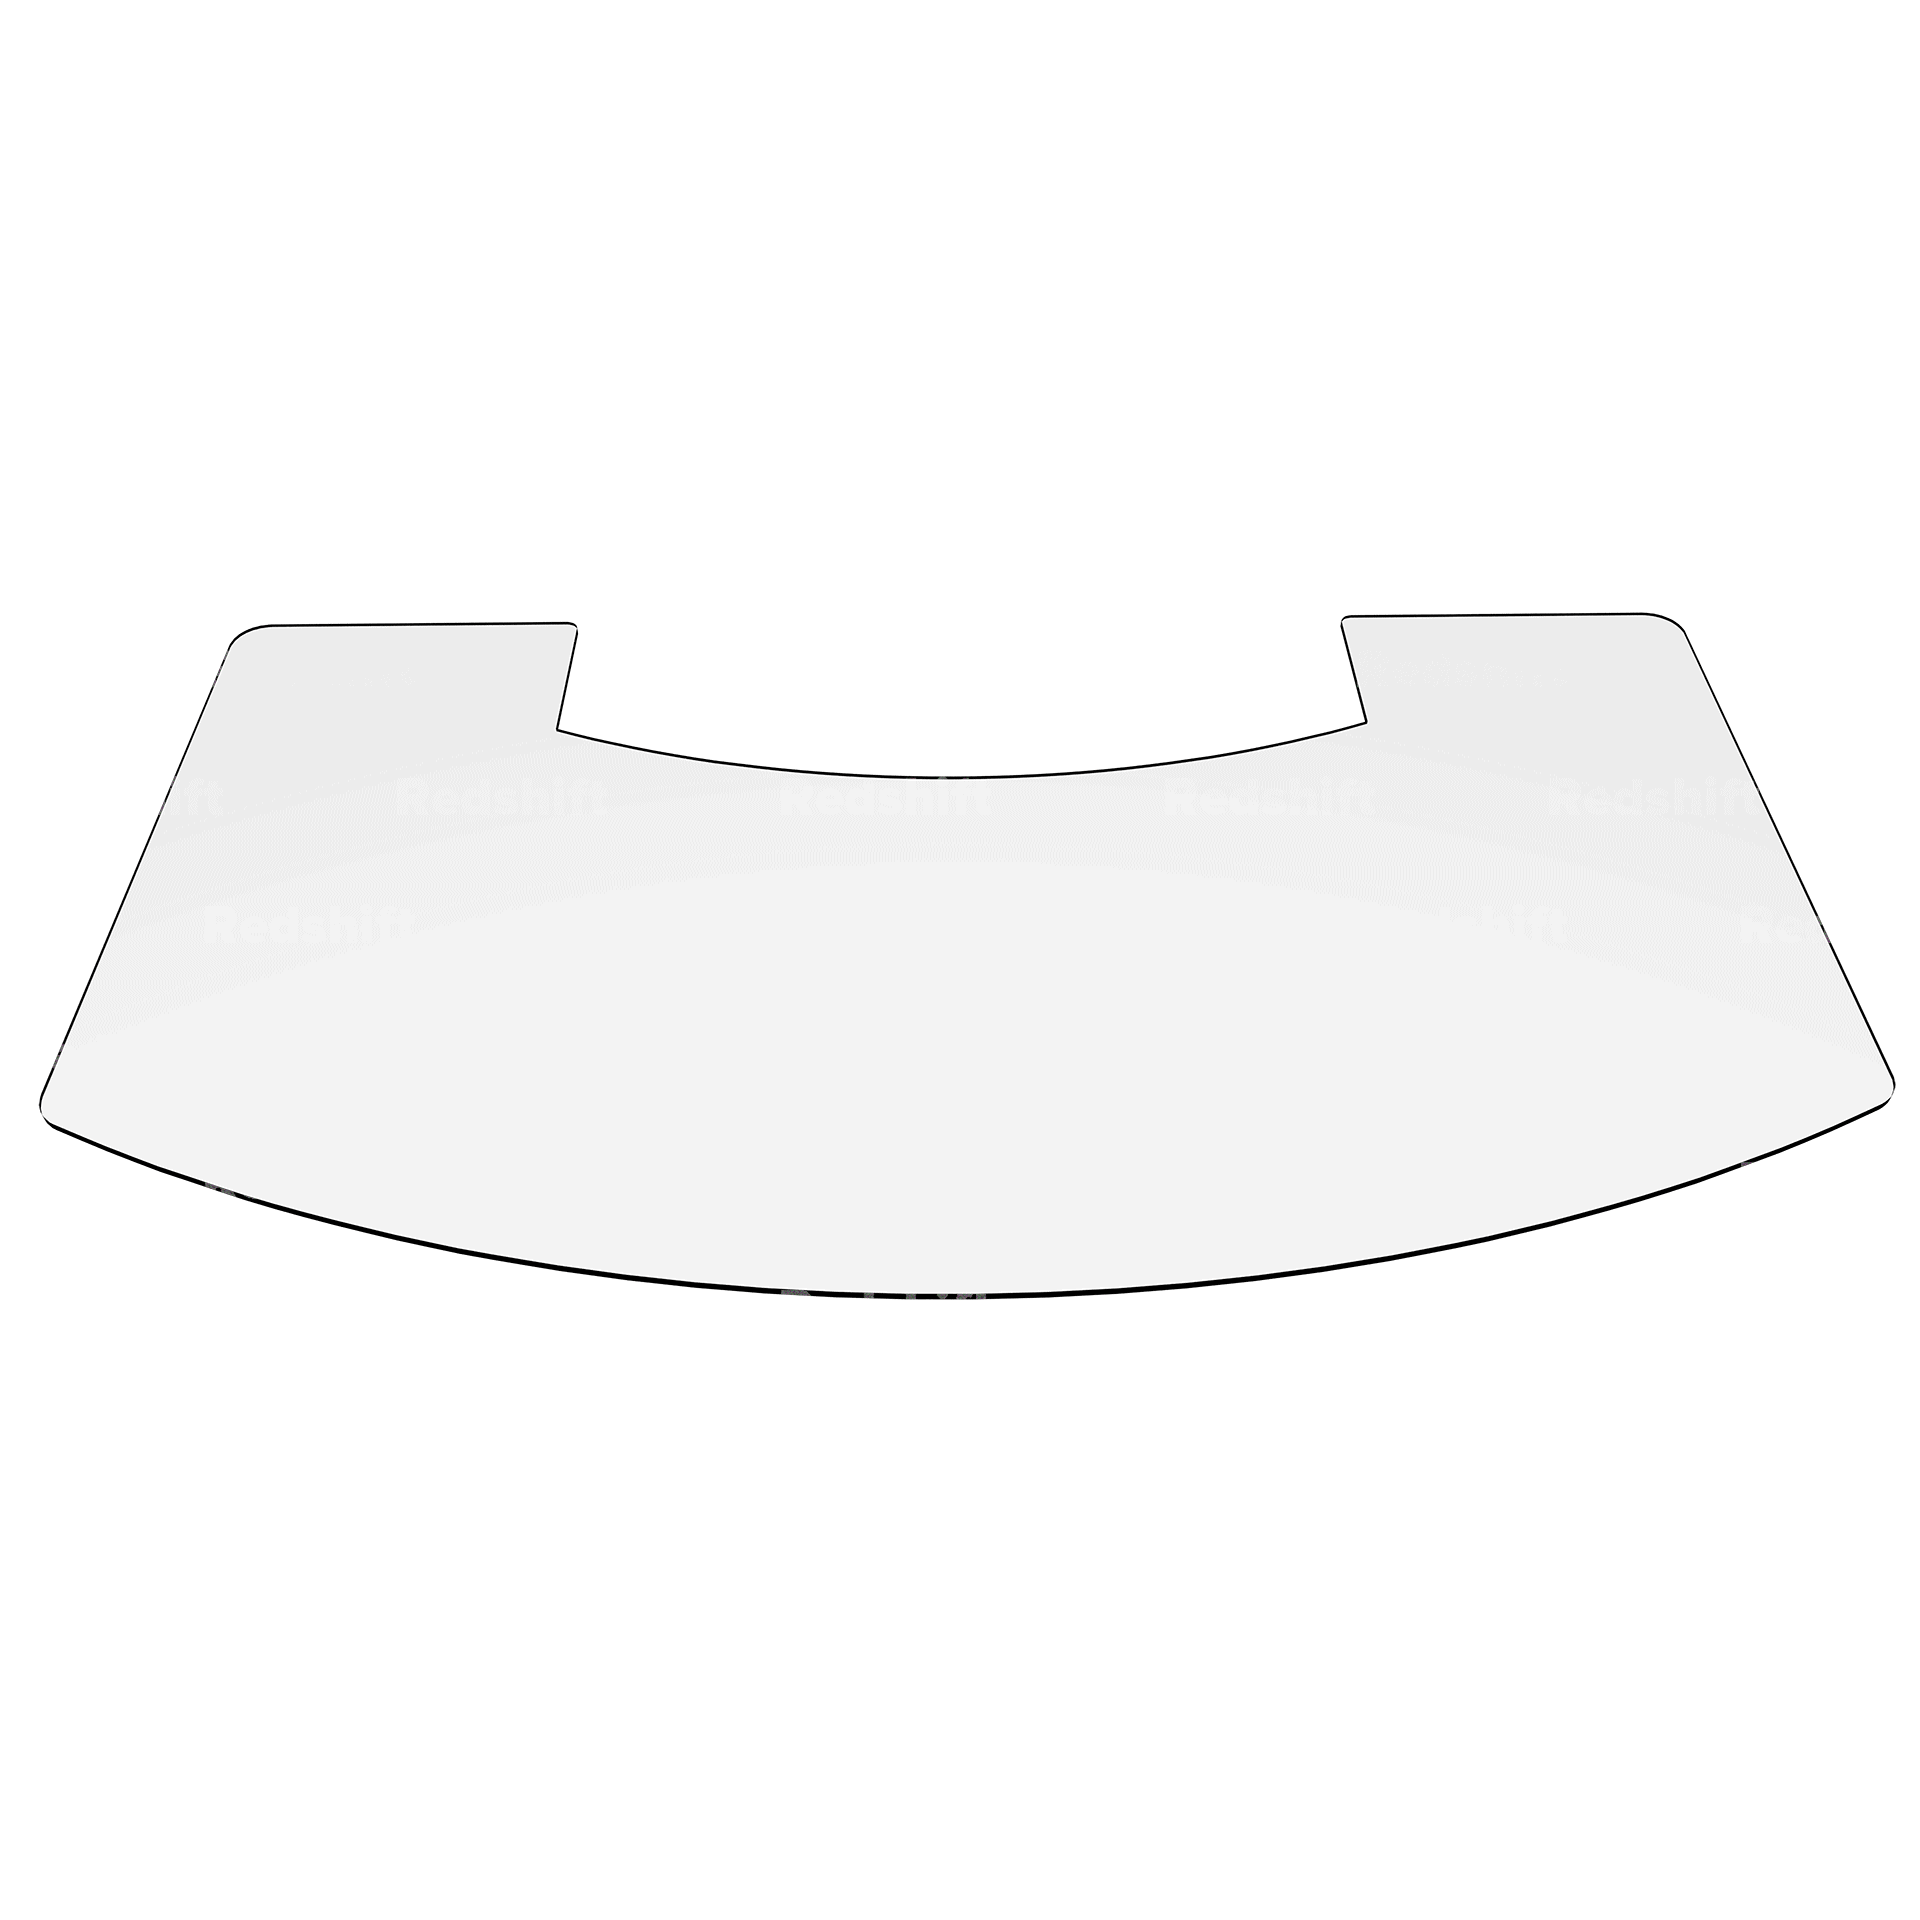 Product image of Scan-Line 1000 Floorpad (3535-0105)